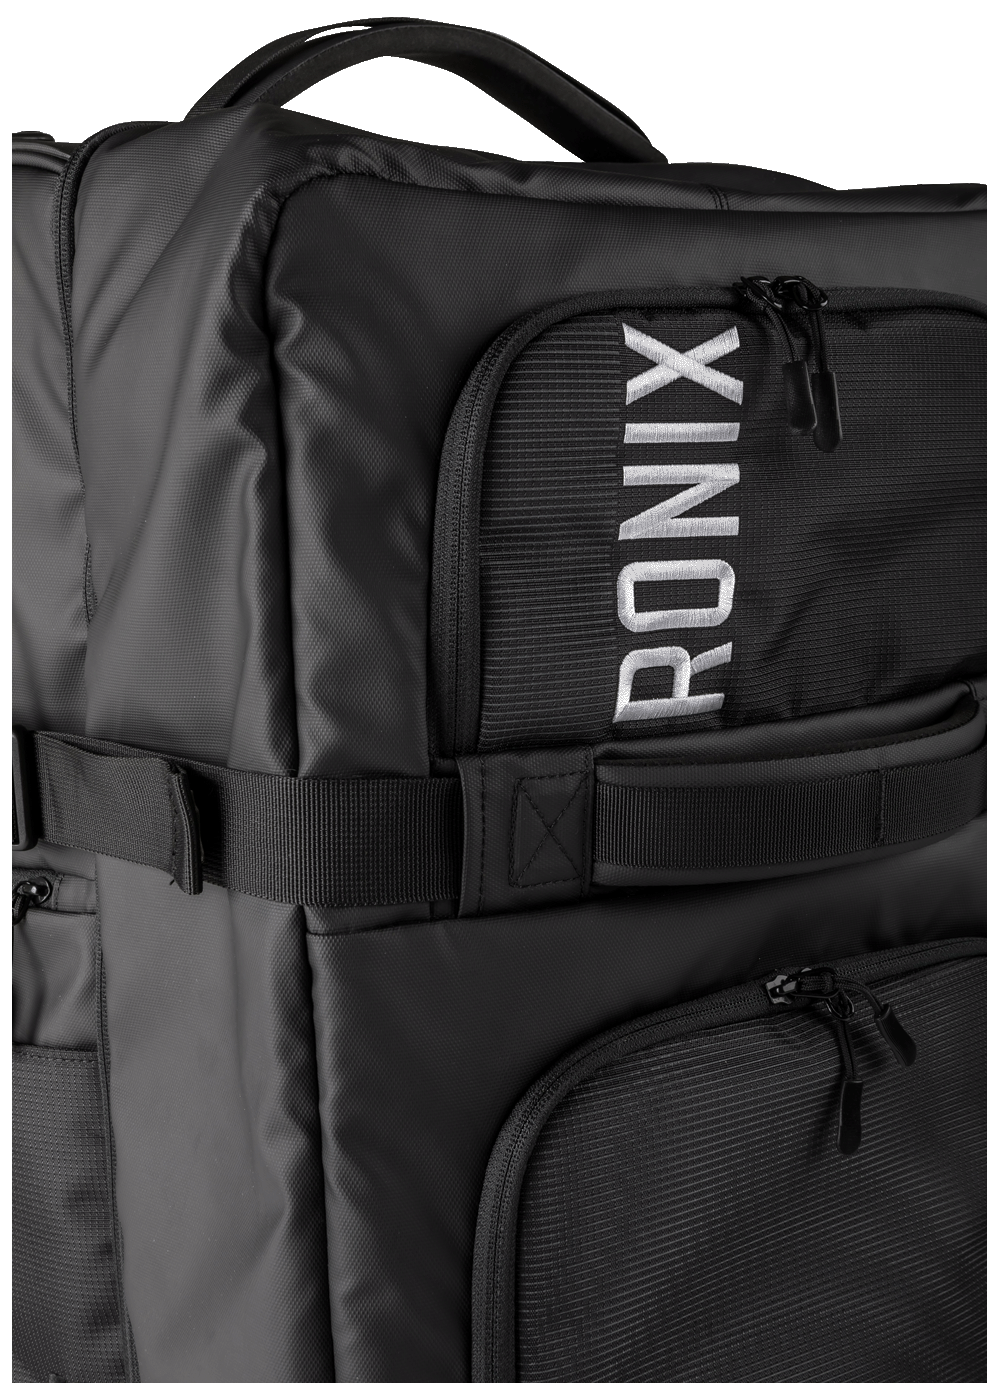 2022 Ronix Bags Transfer Travel Luggage Inset 4 copy